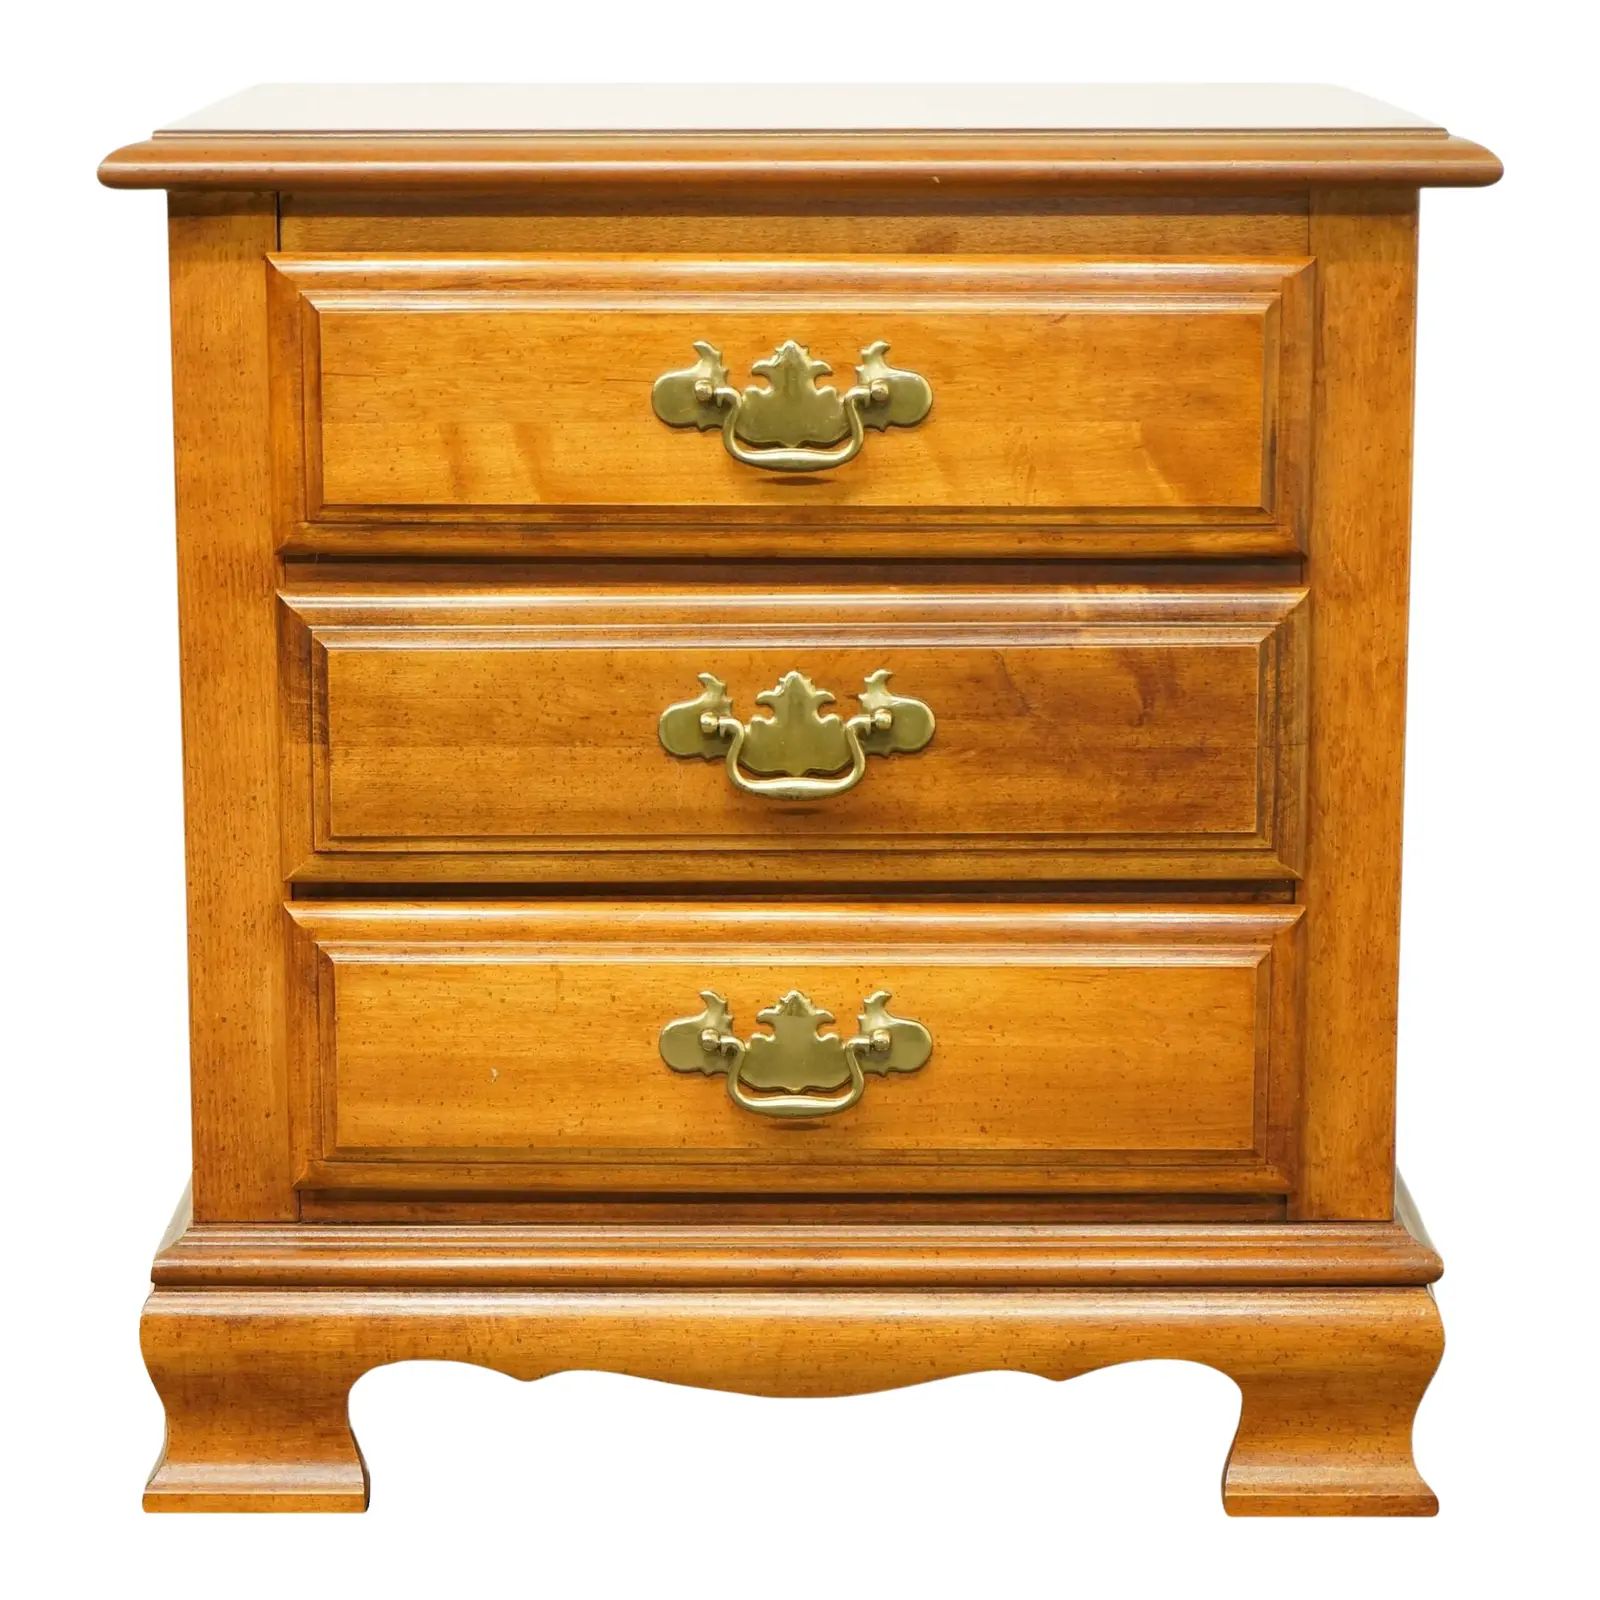 Dixie Furniture Saybrook Maple Country French 24" Three Drawer Nightstand D675-621 | Chairish